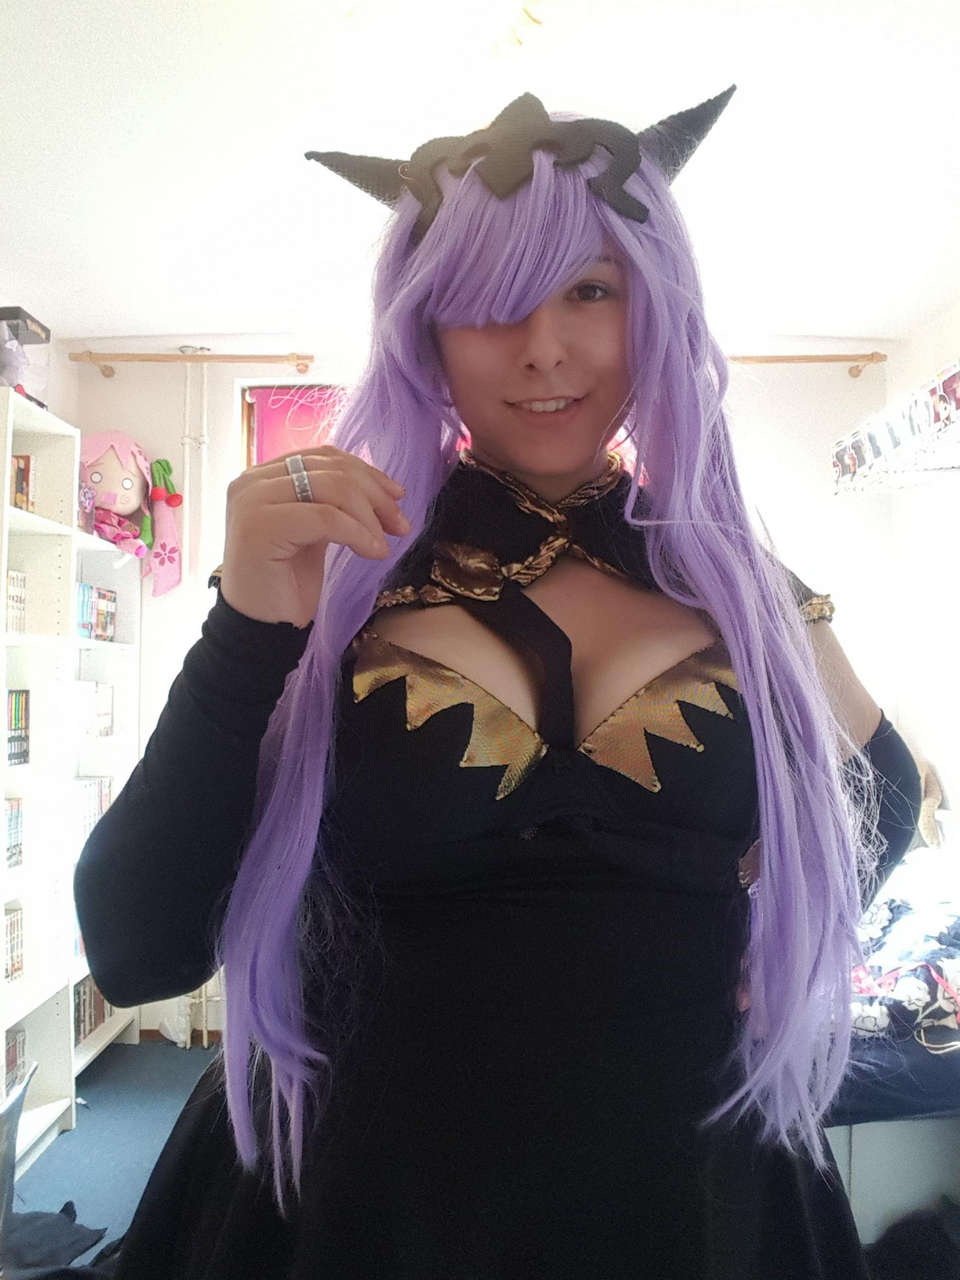 Camilla From Fire Emblem Made By M